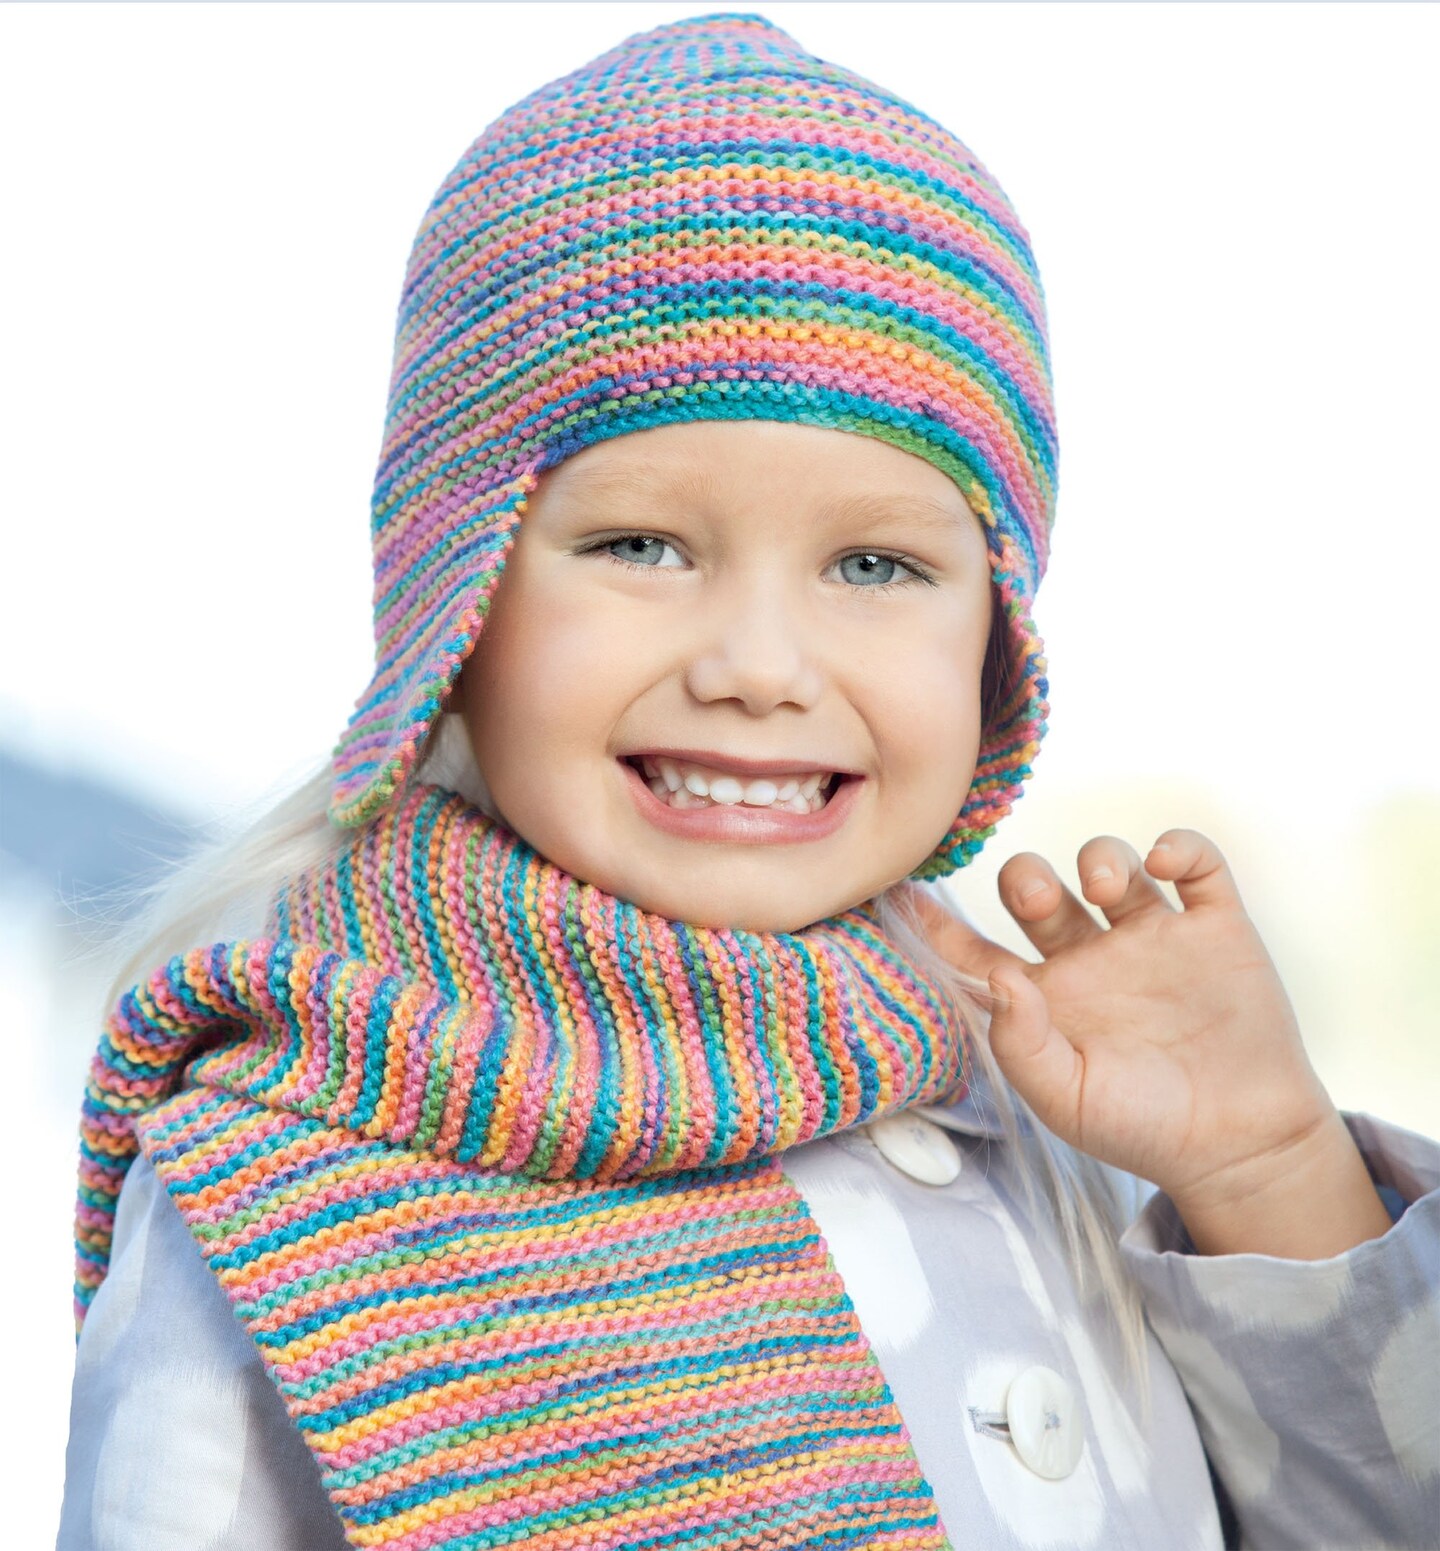 Leisure Arts Hats and Scarves For Kids Crochet Book